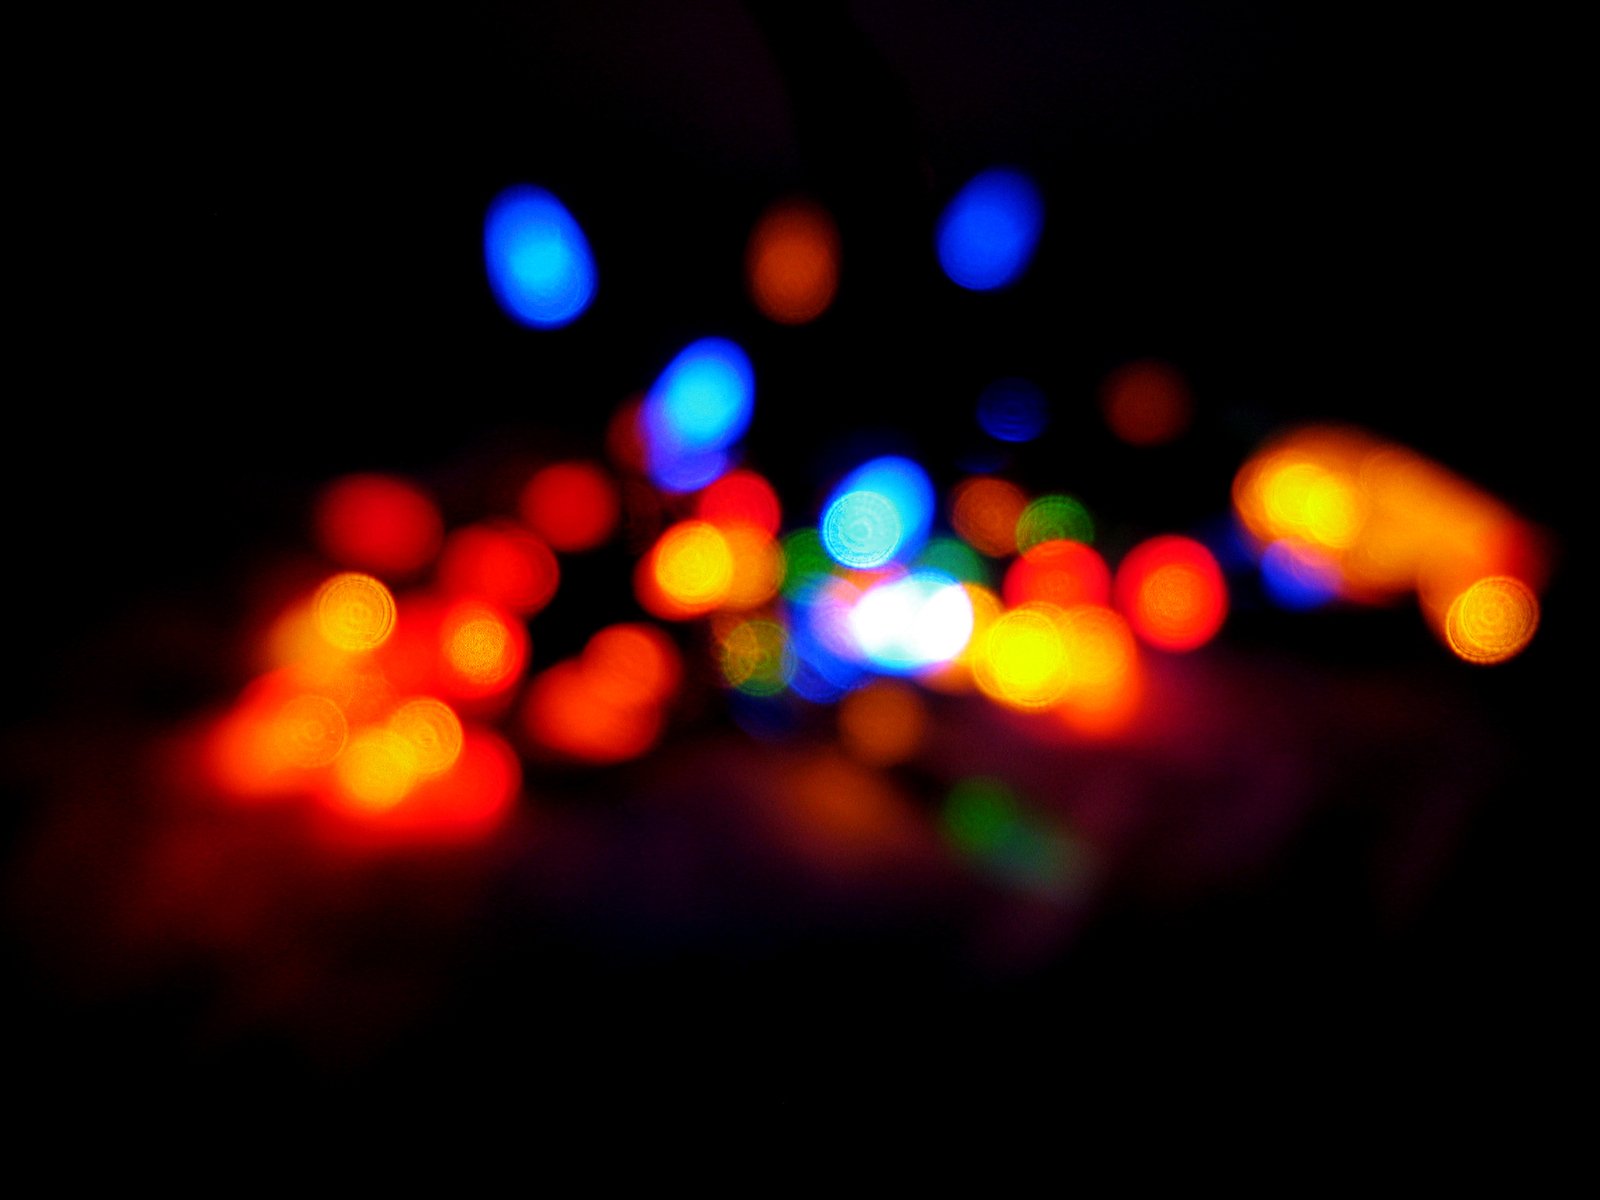 blurry pograph of multi colored lights at night